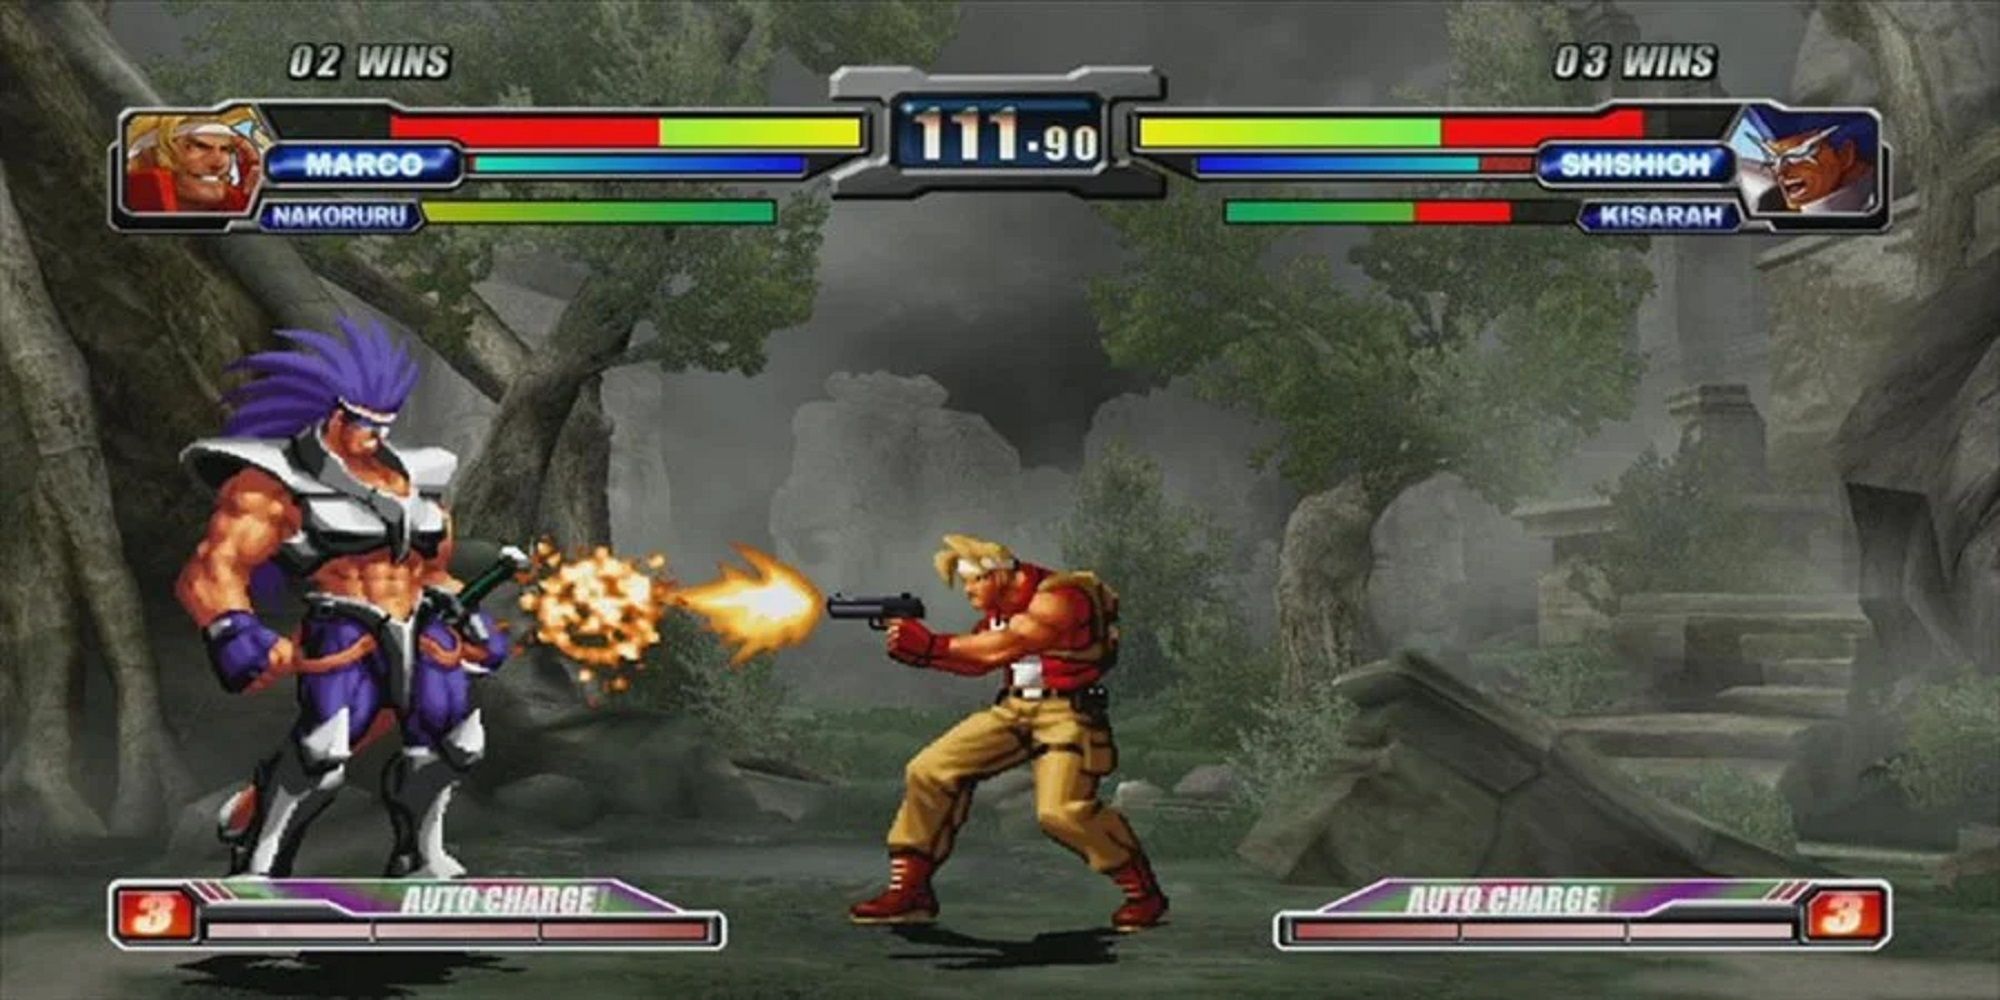 Marco shoots down Shishioh during a battle in a ruins filled forest in NeoGeo Battle Coliseum.